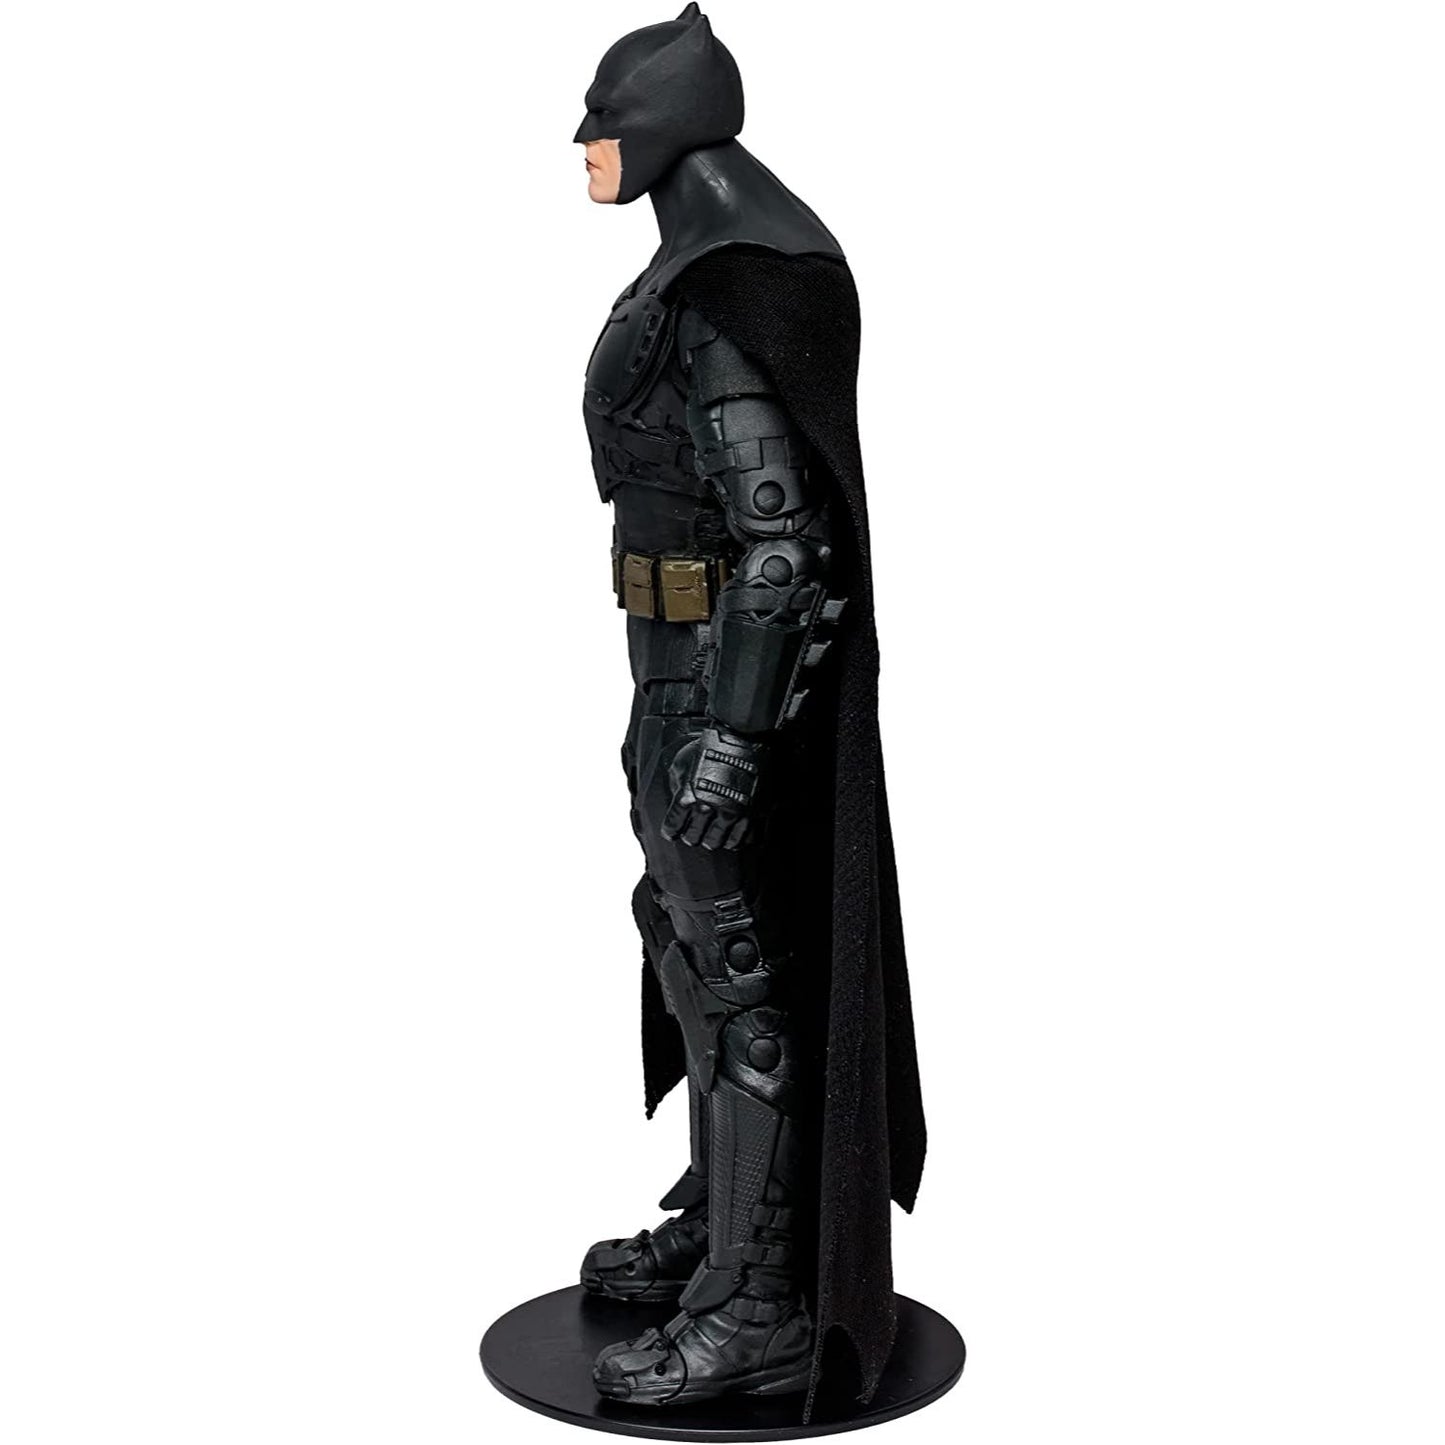 DC Multiverse - The Flash Movie - The Batman Action Figure Toy 7-INCH right side pose- Heretoserveyou